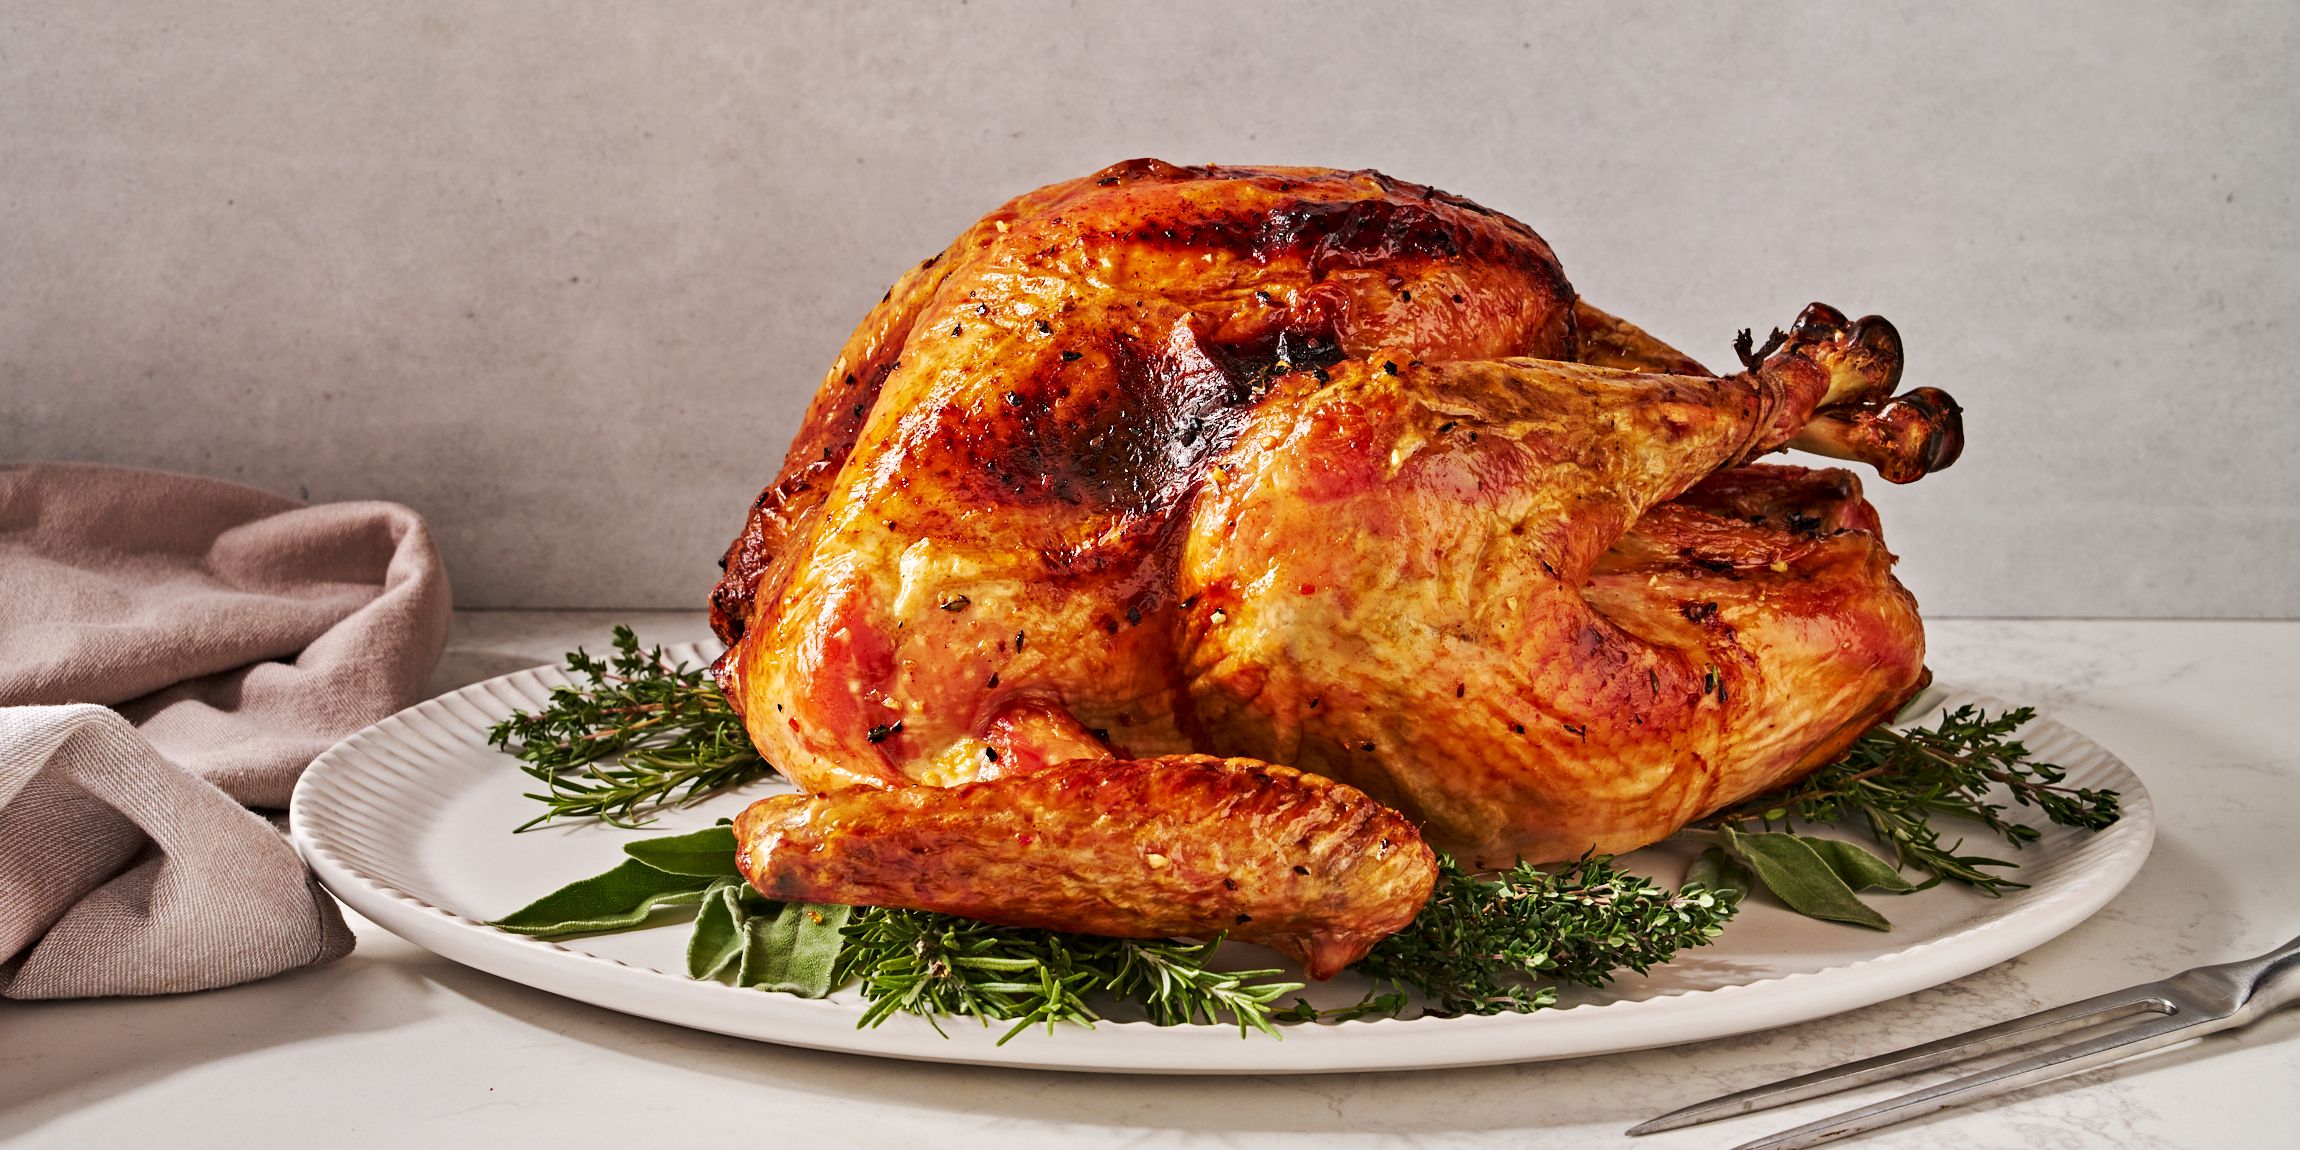 How Much Turkey Per Person Thanksgiving Chart – What Size Turkey Do I Need?